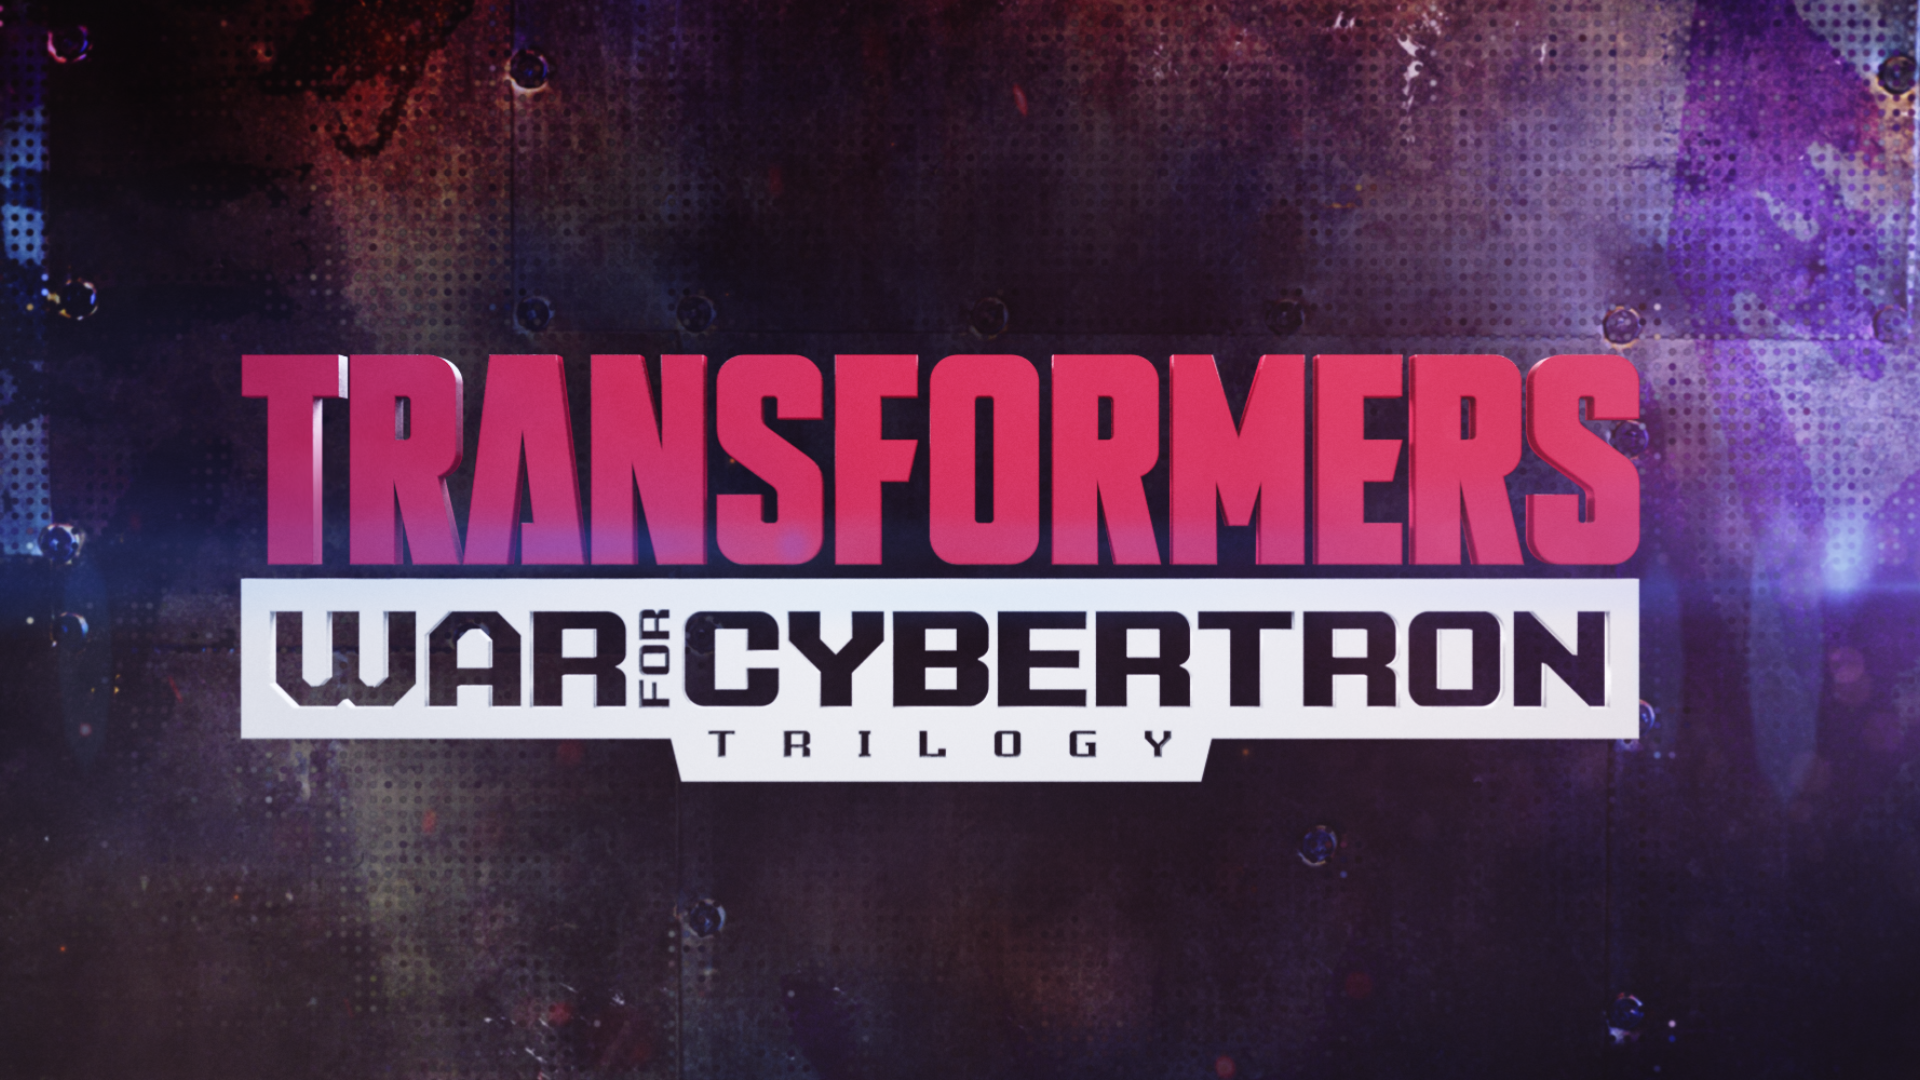 Ms. Marvel Series in 2021 and a Transformers: War For Cybertron Teaser